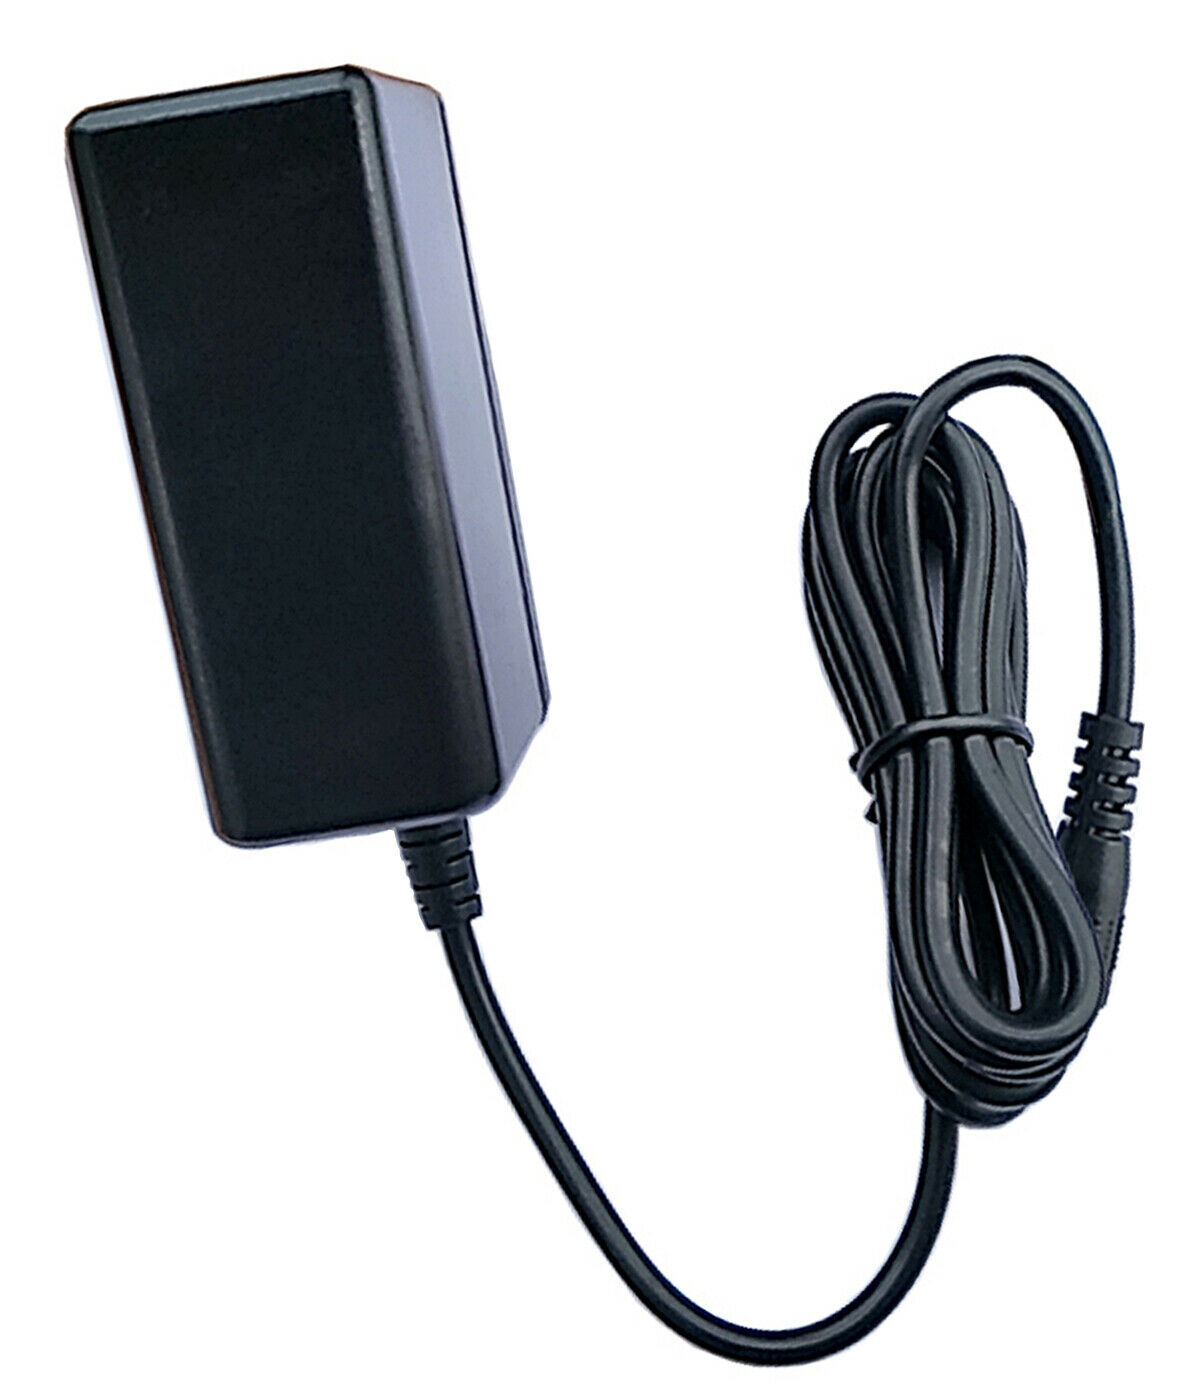 AC Power Adapter for G-Project G-BOOM G-650 G-650A Wireless Bluetooth Boombox Compatible Brand: For G-Project Type: A